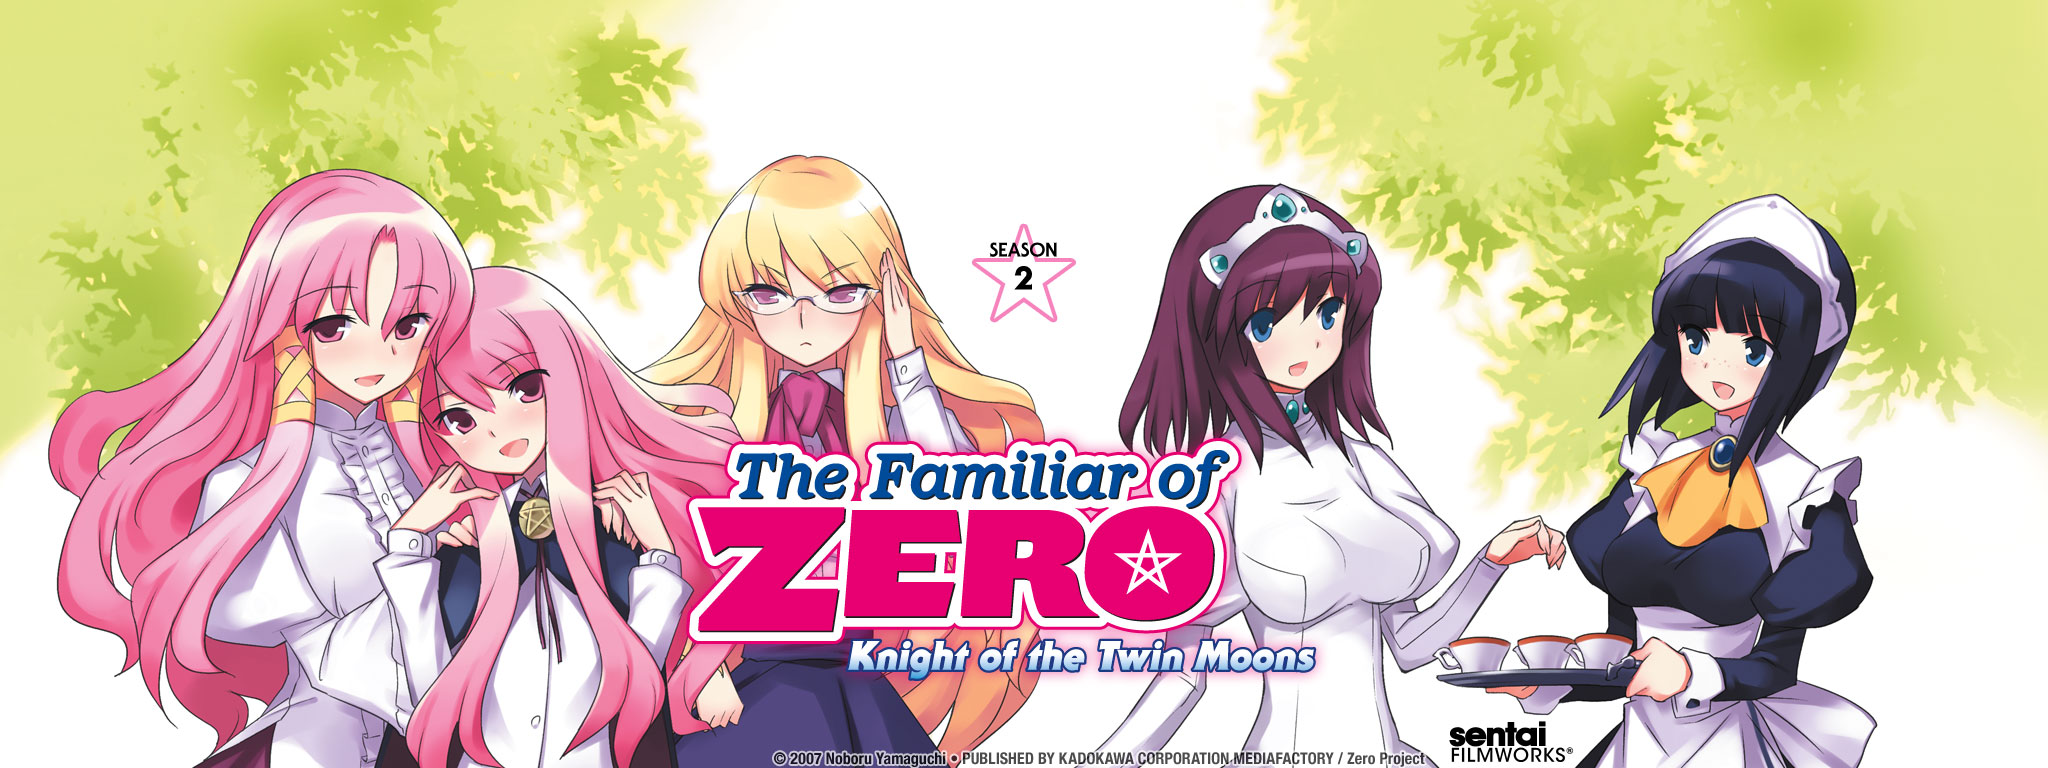 Title Art for The Familiar of Zero: Knight of the Twin Moons